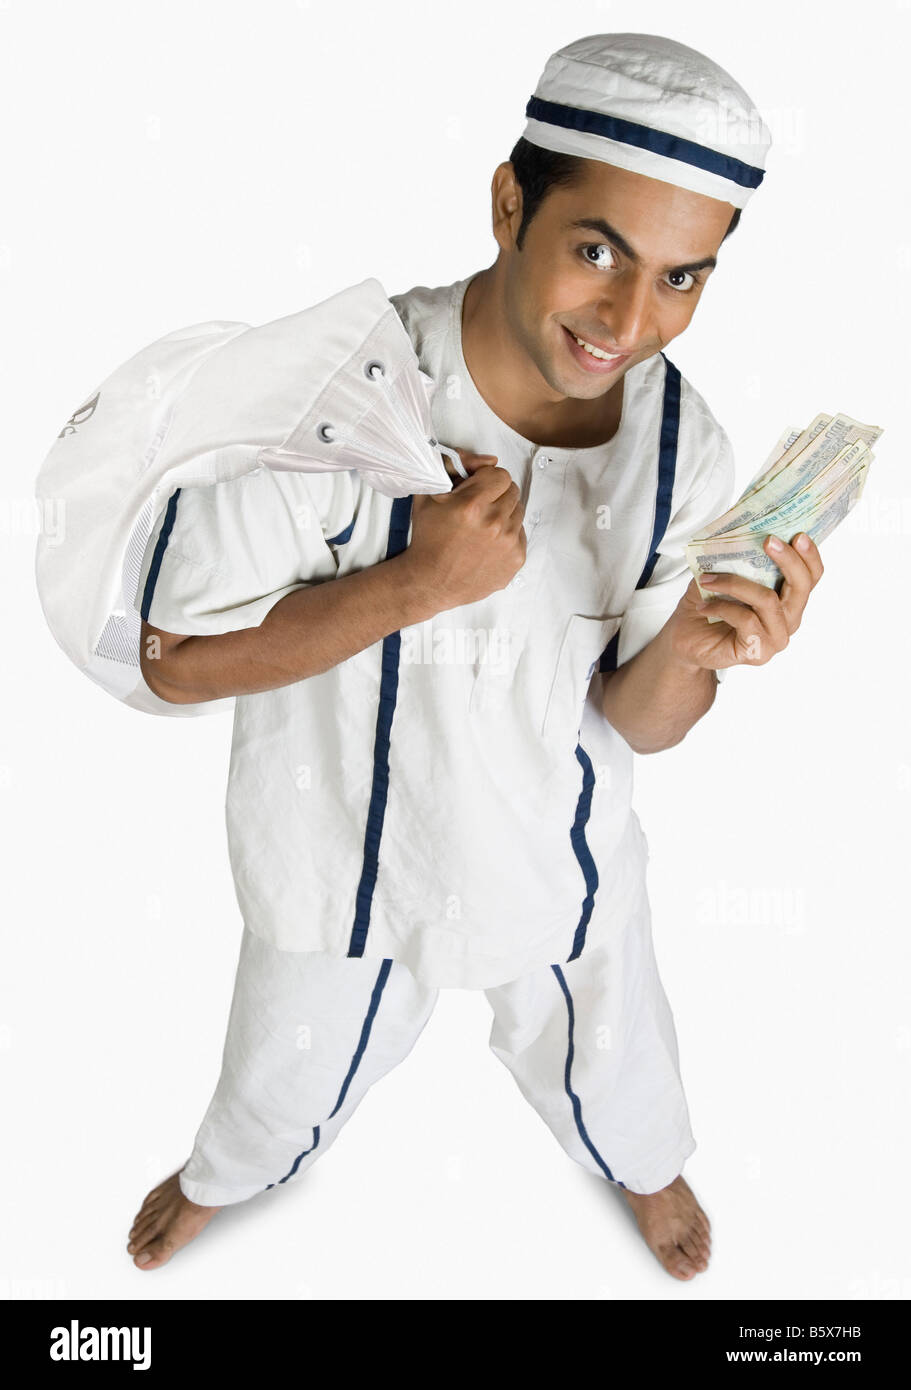 Portrait of a prisoner carrying a bag and showing paper currency Stock Photo